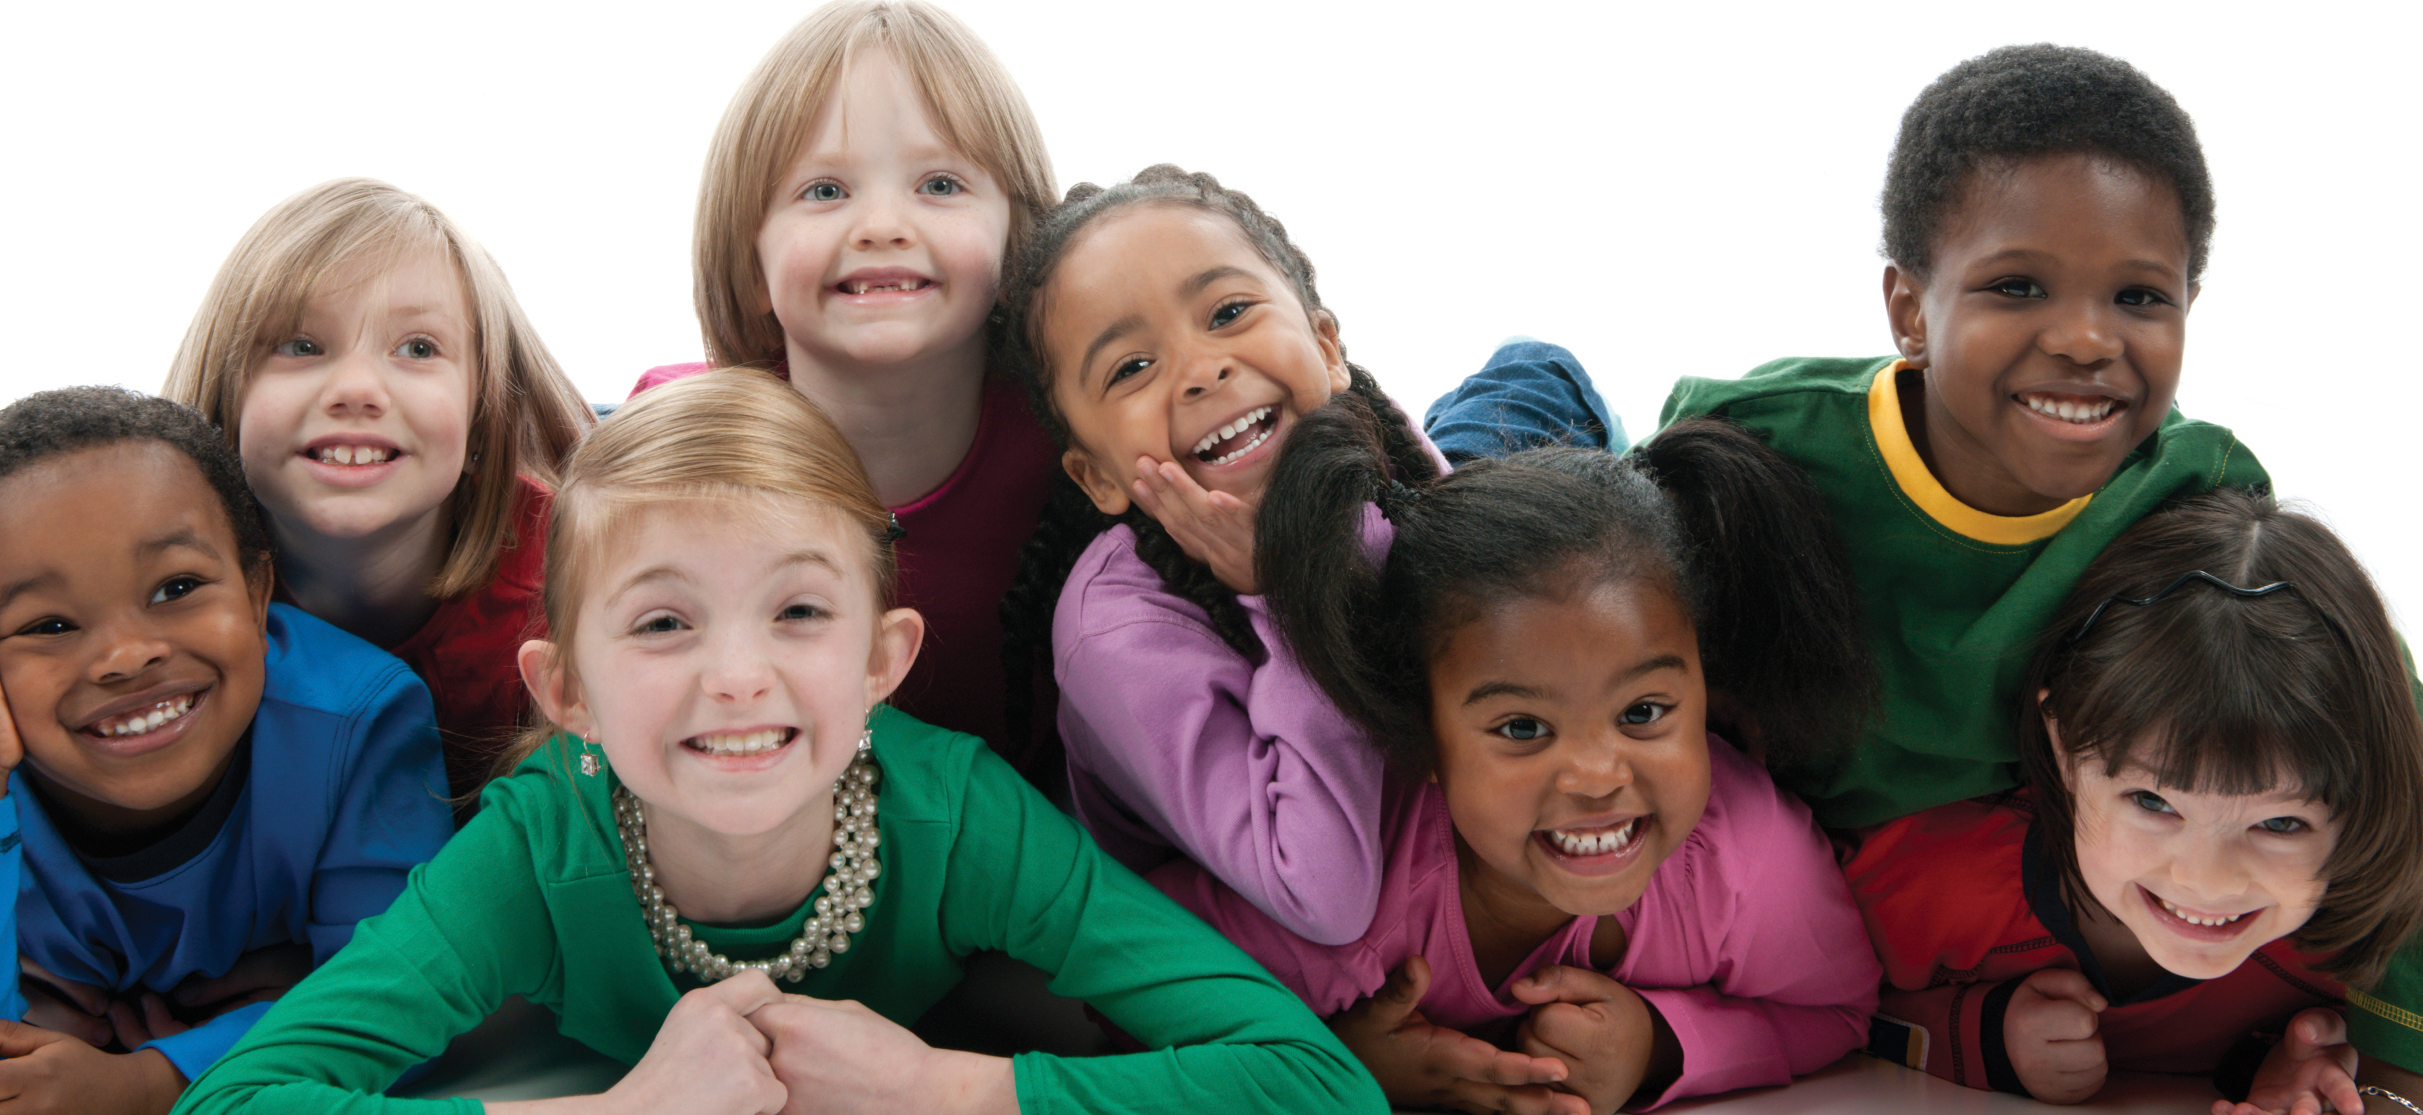 A diverse group of children on a white background